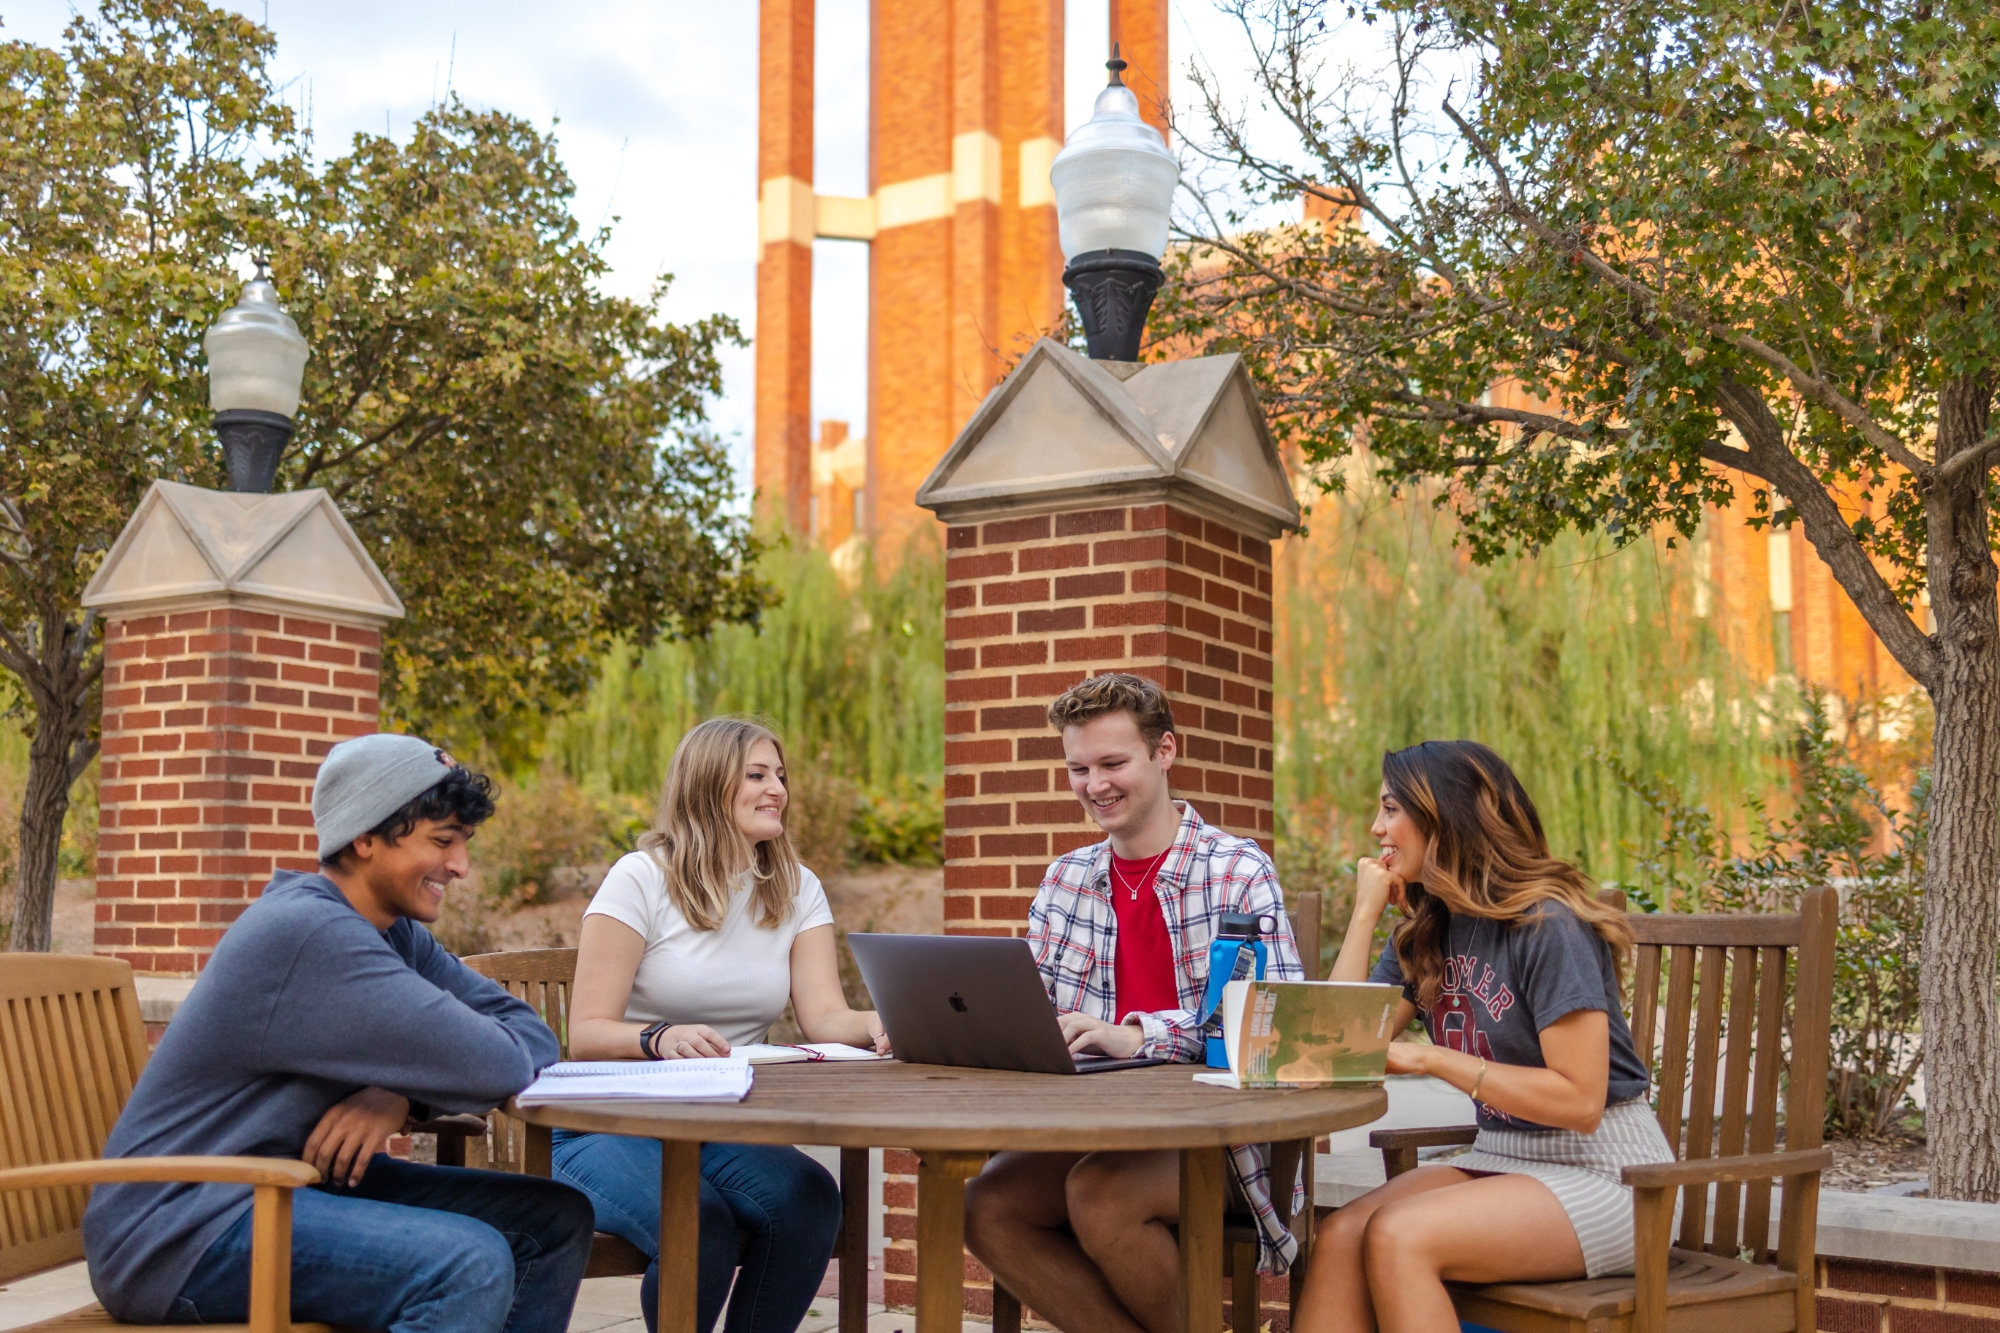 Students enjoying a study session in the shade behind Ellison Hall near the Clock Tower